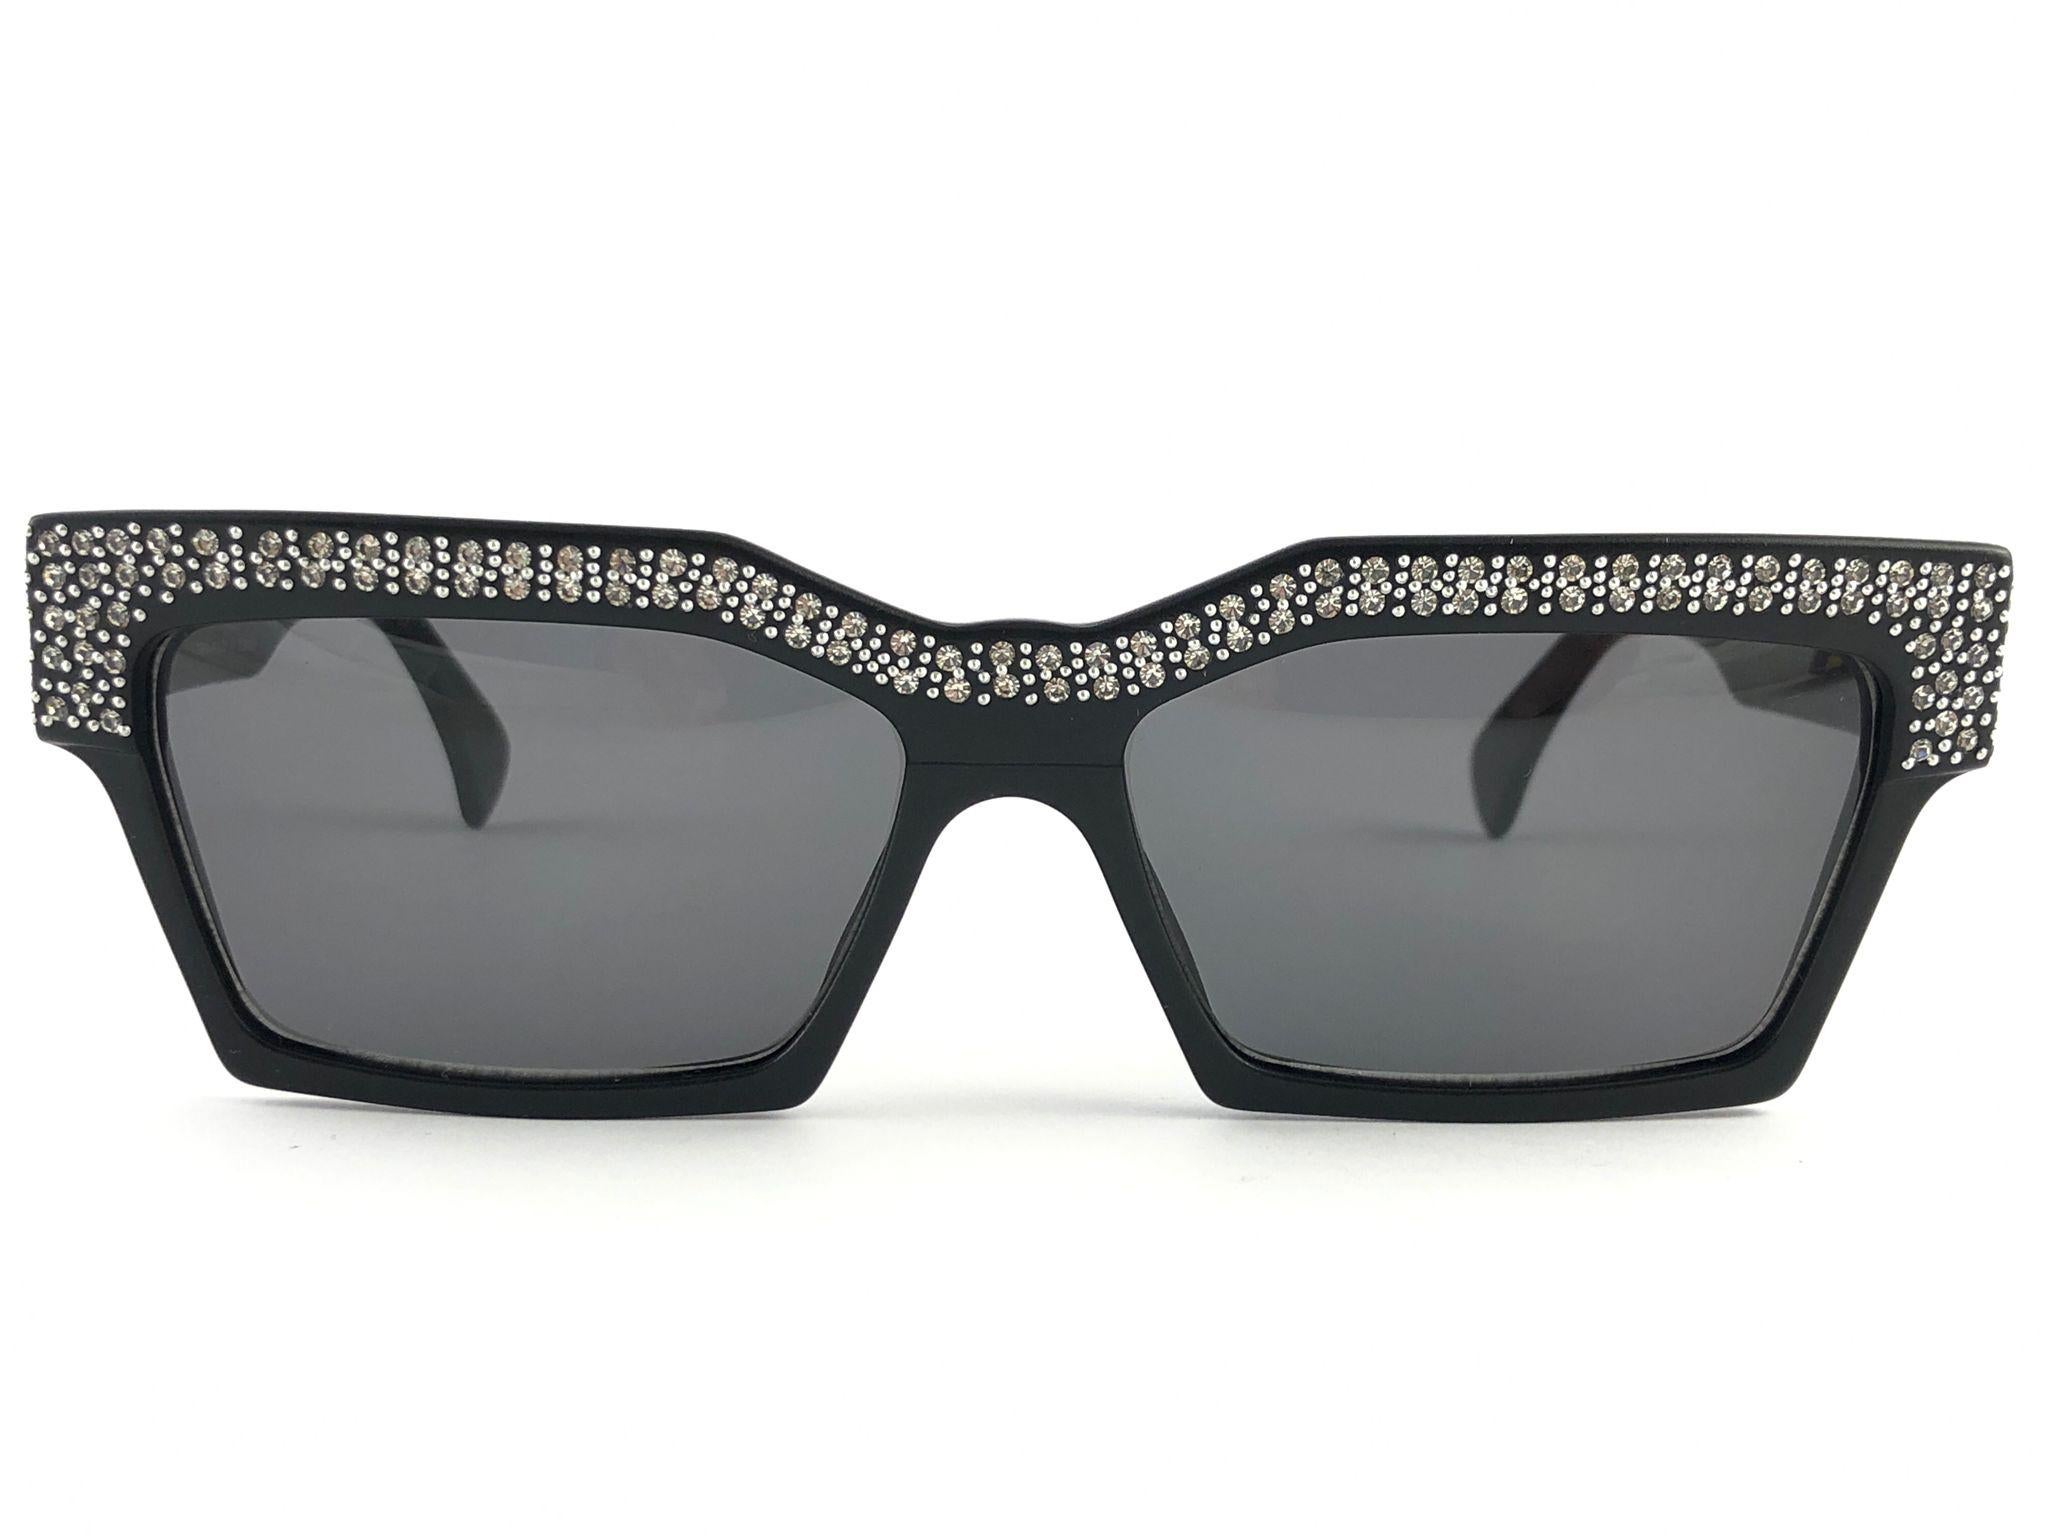 Seldom Vintage Rare Alain Mikli 1989 AM318101 black and strass sculptured frame.

Medium grey lenses.

Please consider that this item is nearly 40 years old so it could show minor sign of wear due to storage.

Made in France.

MEASUREMENTS :

FRONT